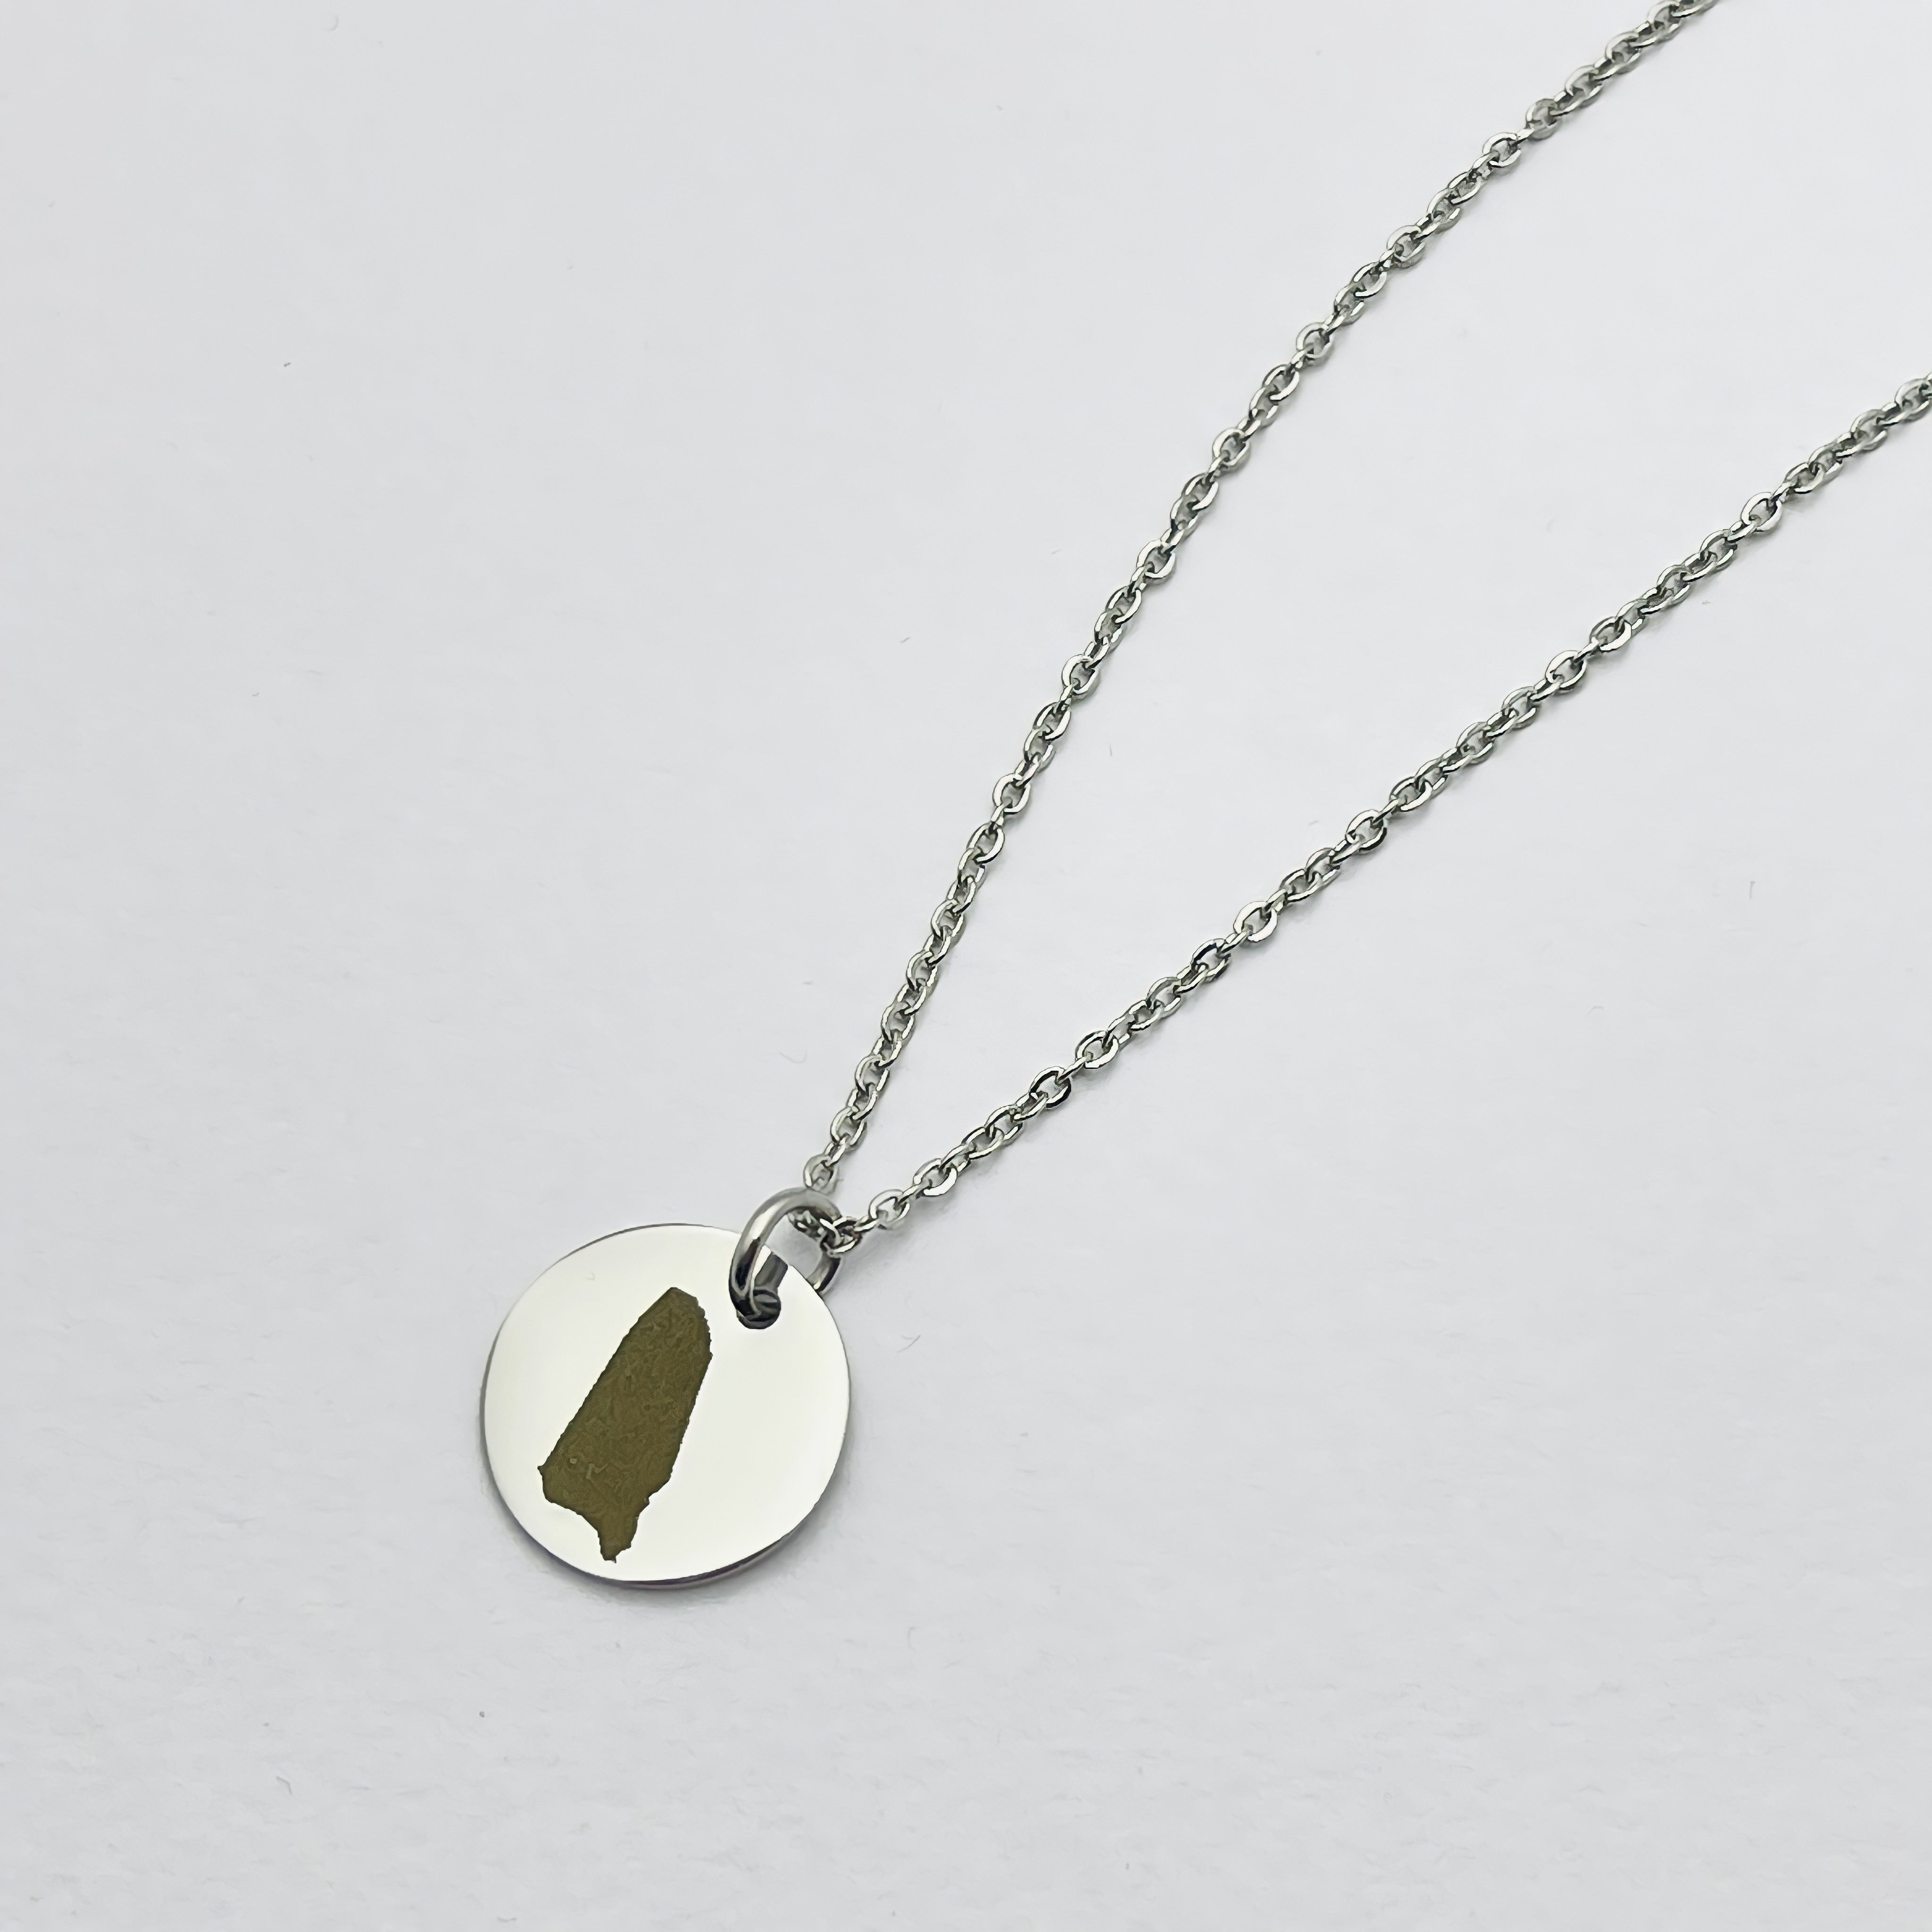 Pineapple Sterling Silver Necklace On Bespoke Card By Grace & Valour |  notonthehighstreet.com